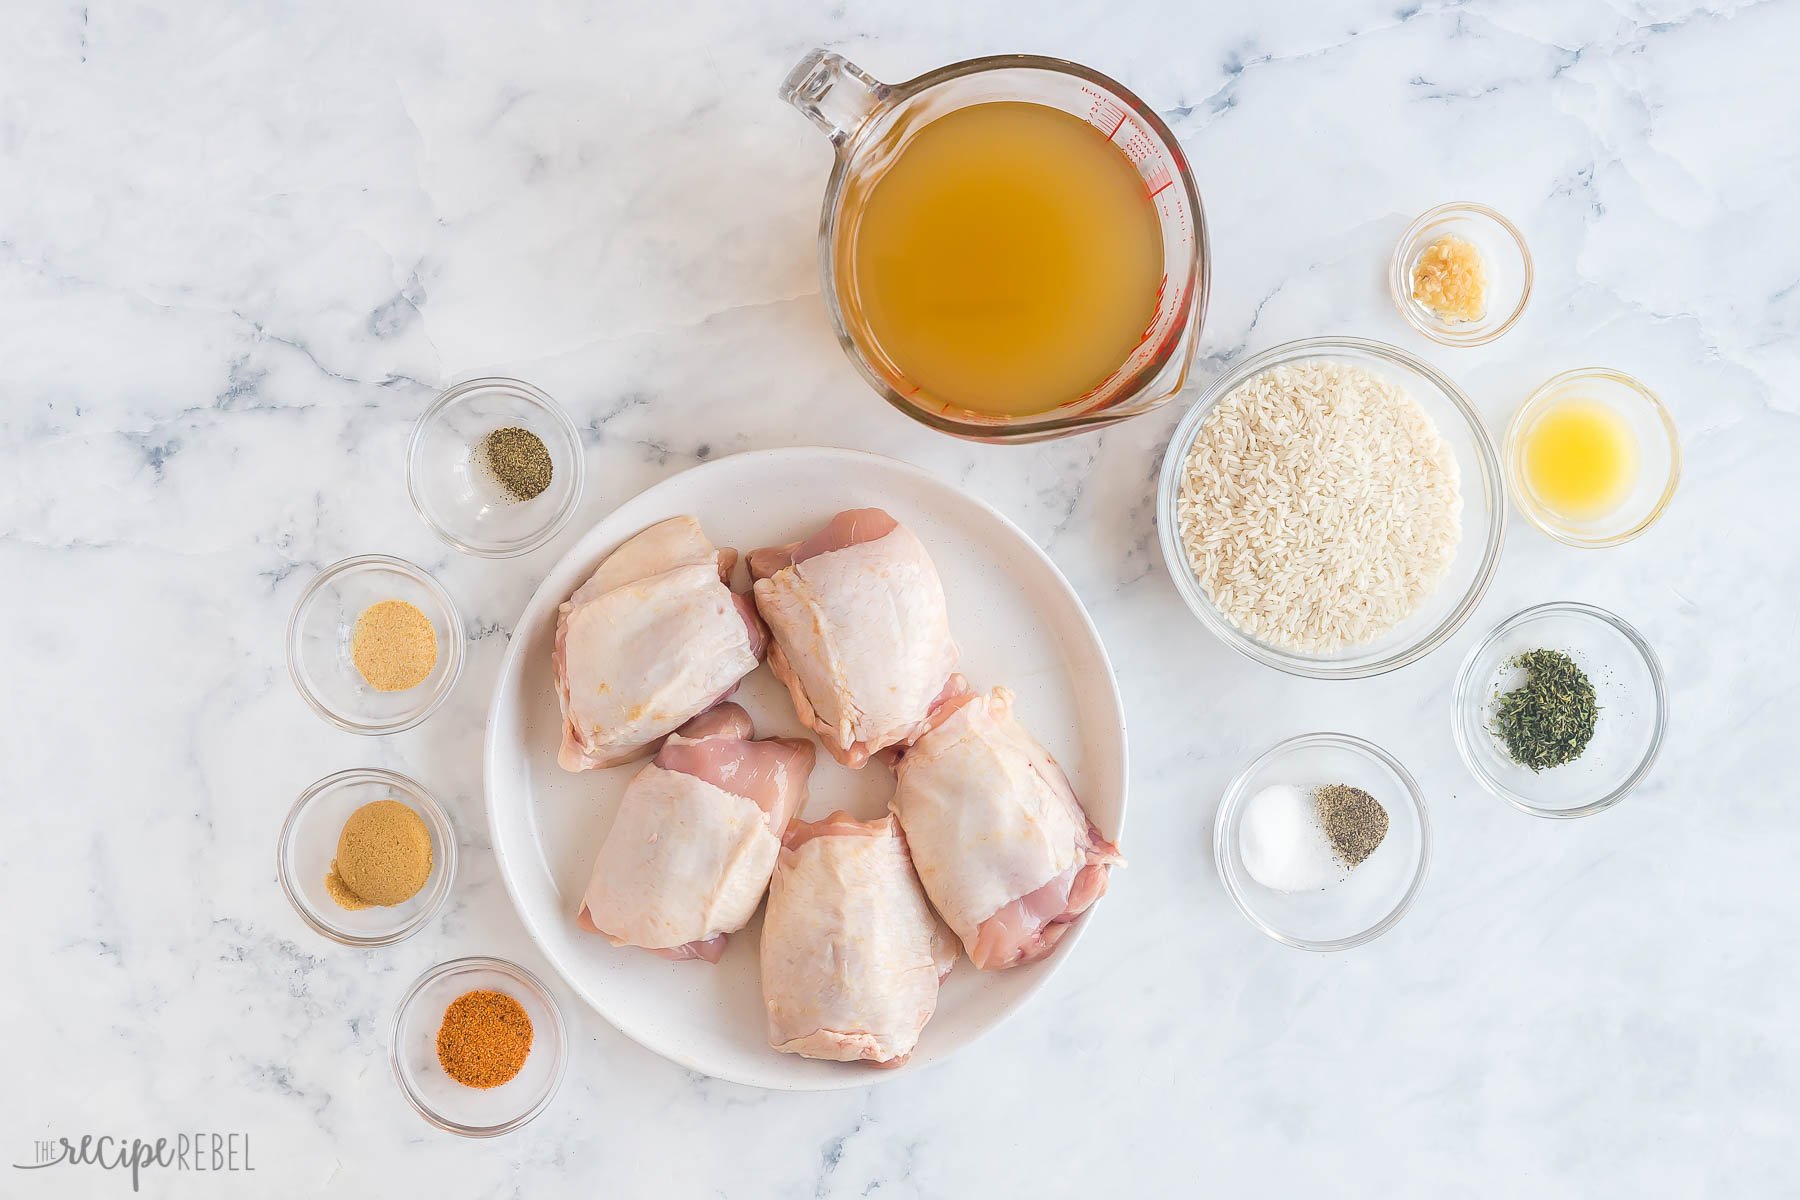 ingredients needed for chicken and rice bake